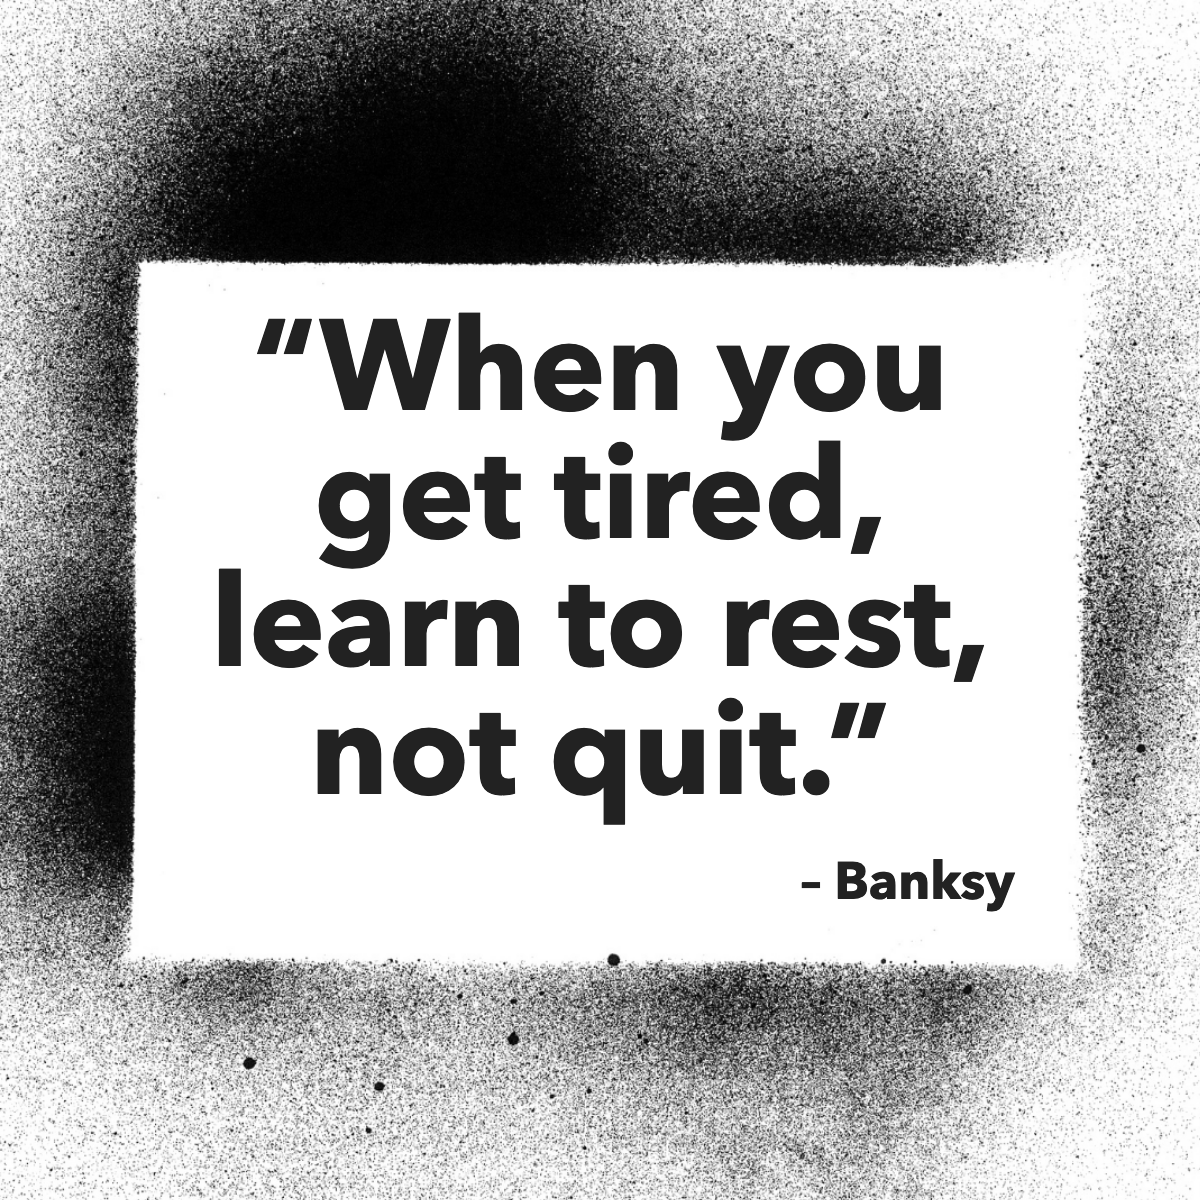 Don't feel guilty if you ever get tired, take your time ... 😉

#motivationnation #motivationalquotesdaily #quoteoftheday #quoteofday #quotedaily

 #GAMountainRealEsate #NCMountainRealEstate #CallRickAndrews #RickAndrews #C21BlackBearRealty